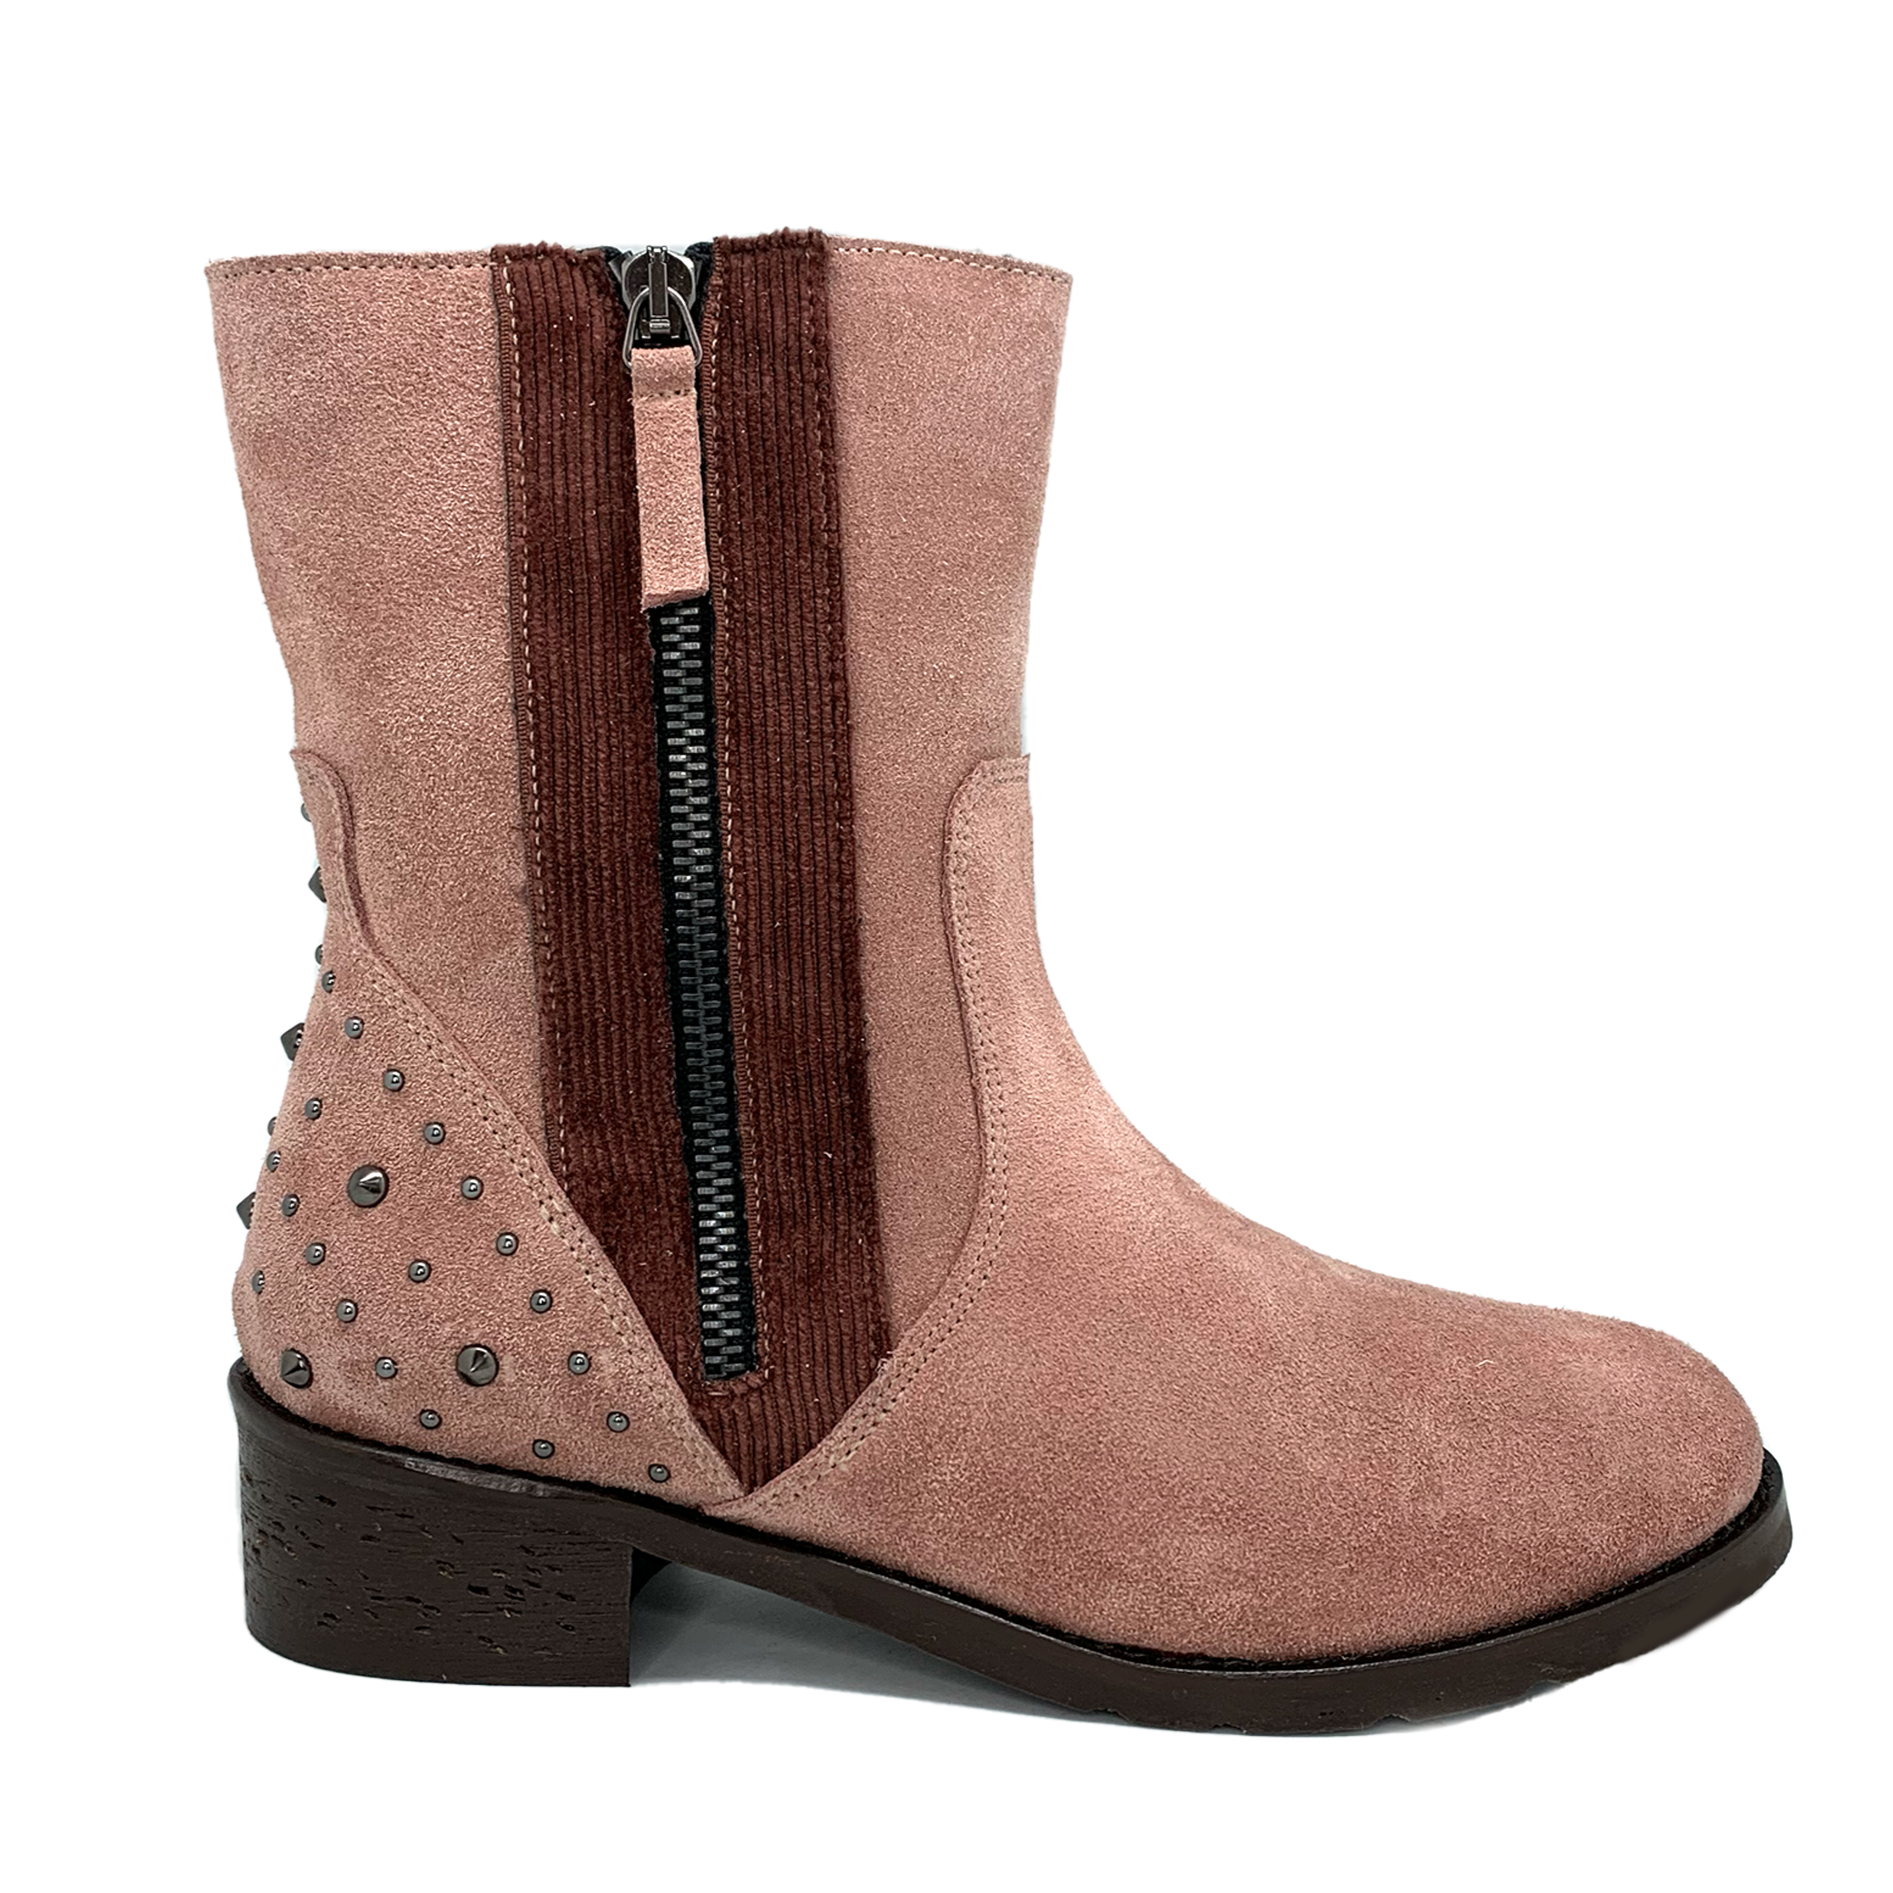 A pair of Designer Boots named Mes Amie Blush, brown ankle boot